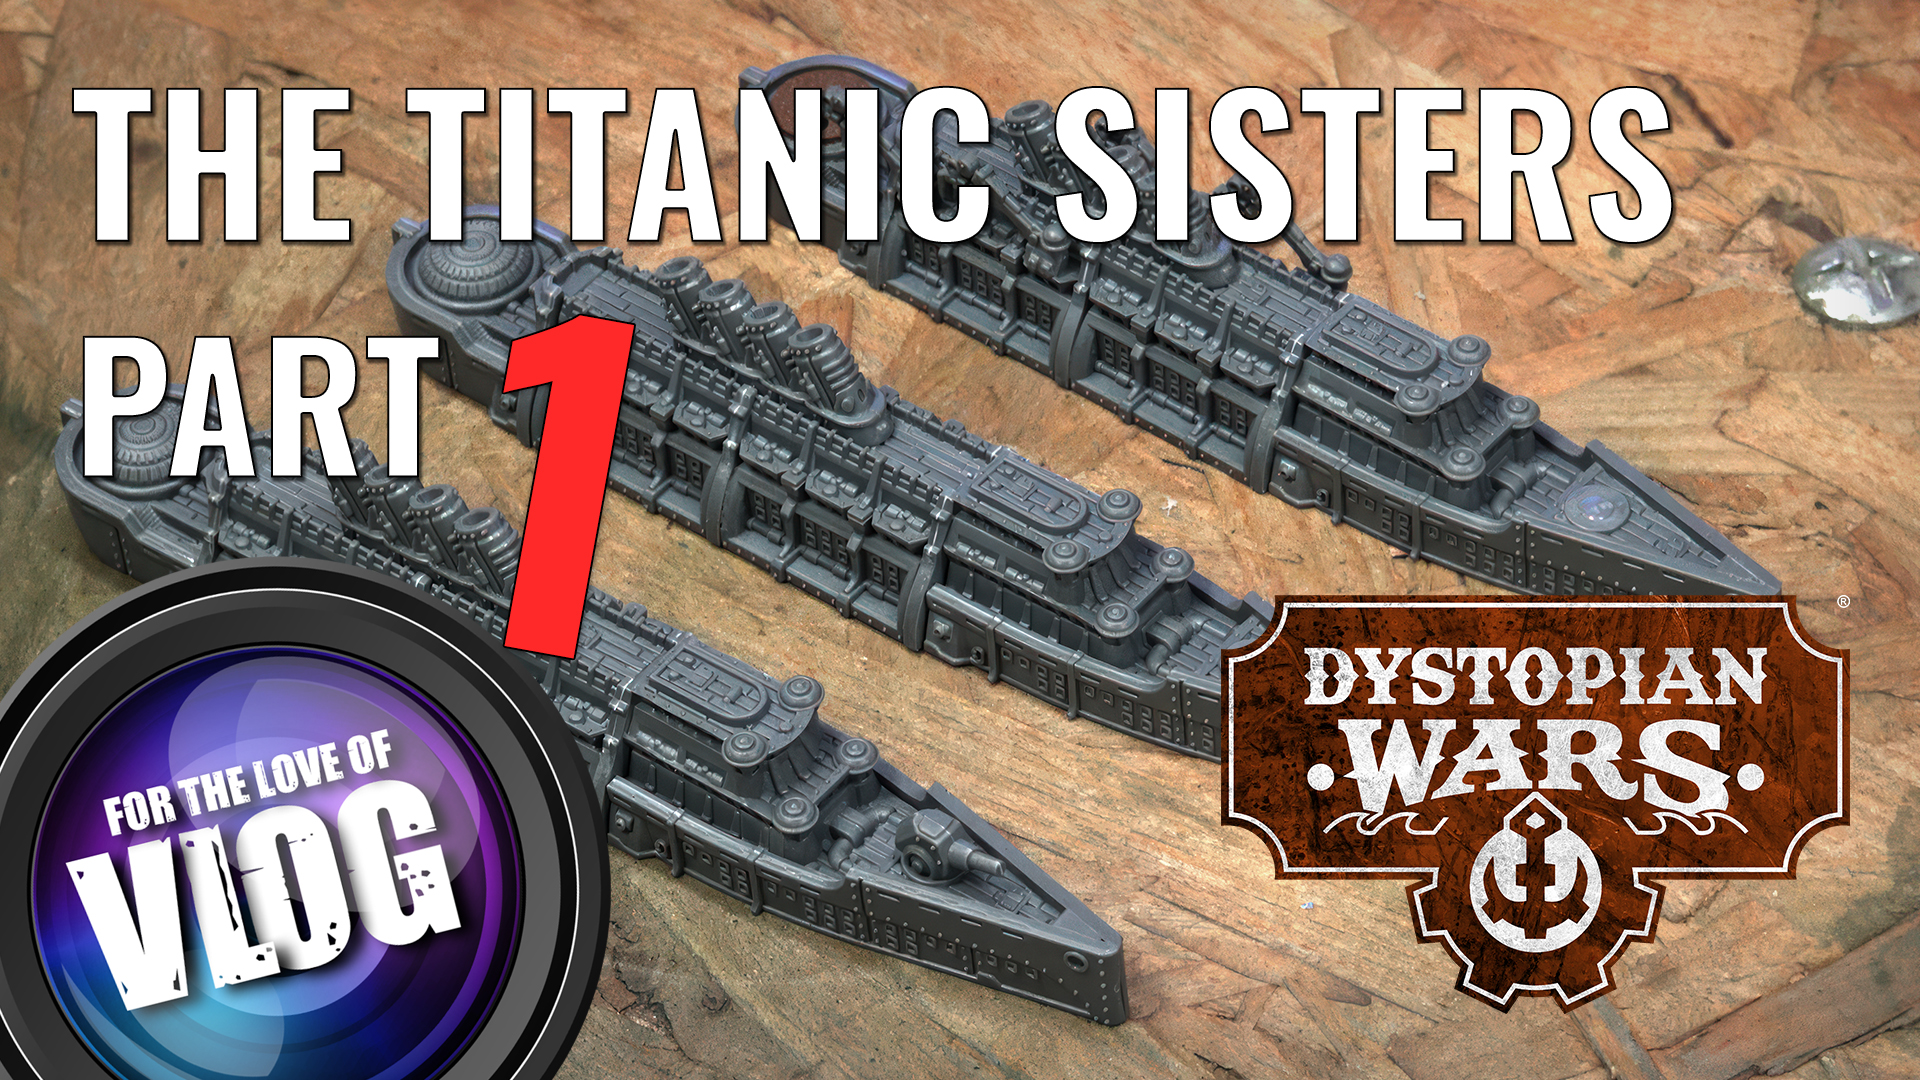 Part one Building Titanic and Sisters in Dystopian Wars